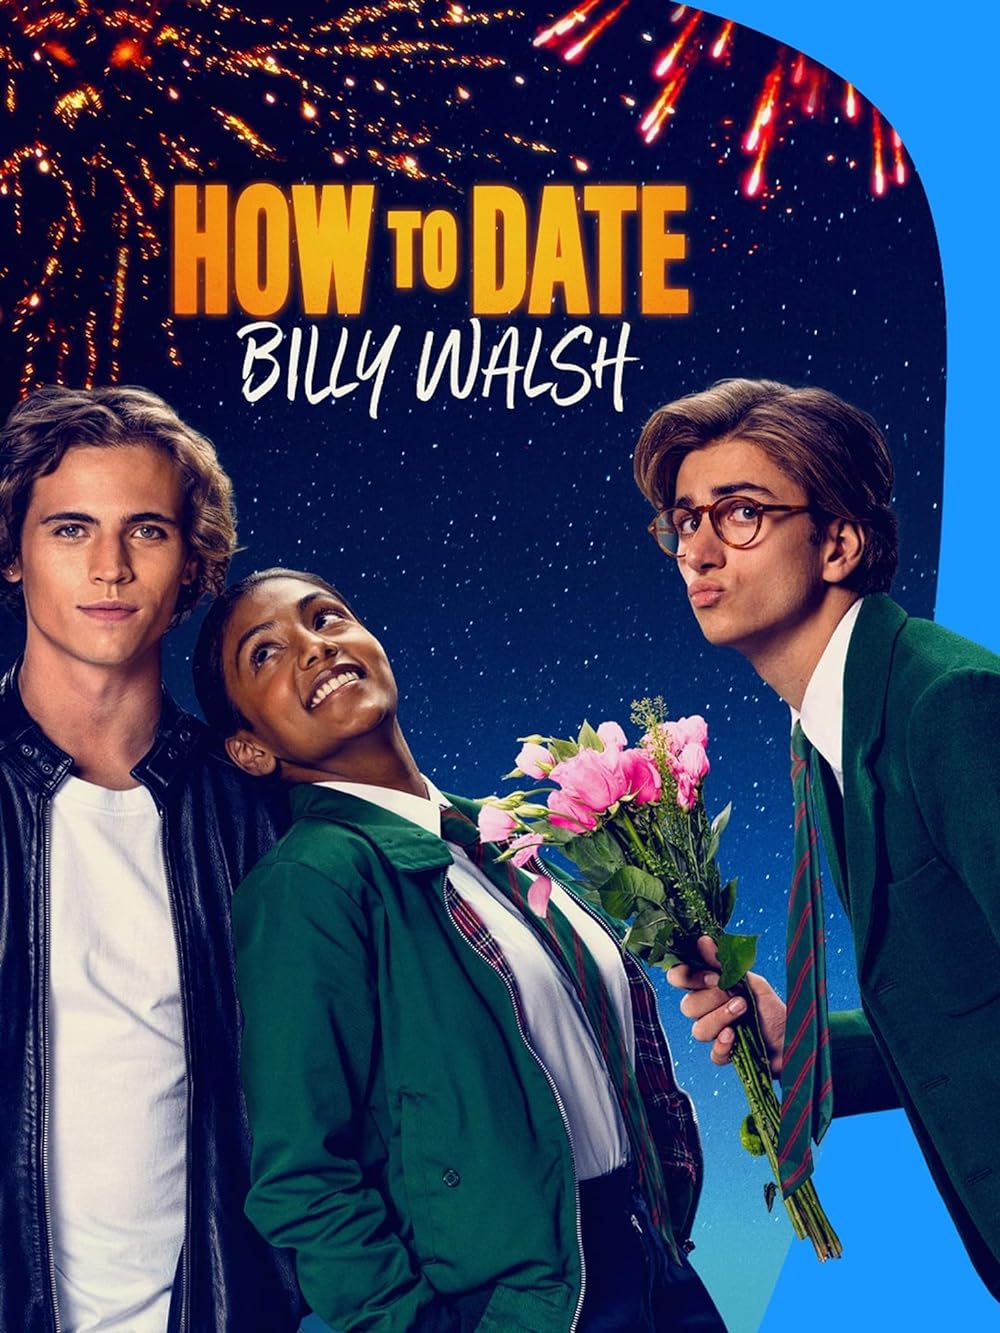 How to Date Billy Walsh (April 5, Prime Video)Follow the romantic misadventures of best friends Amelia and Archie in this charming British comedy. As Archie harbours secret feelings for Amelia, their friendship is put to the test when a new student, Billy Walsh, arrives, sparking unexpected complications and hilarious antics.